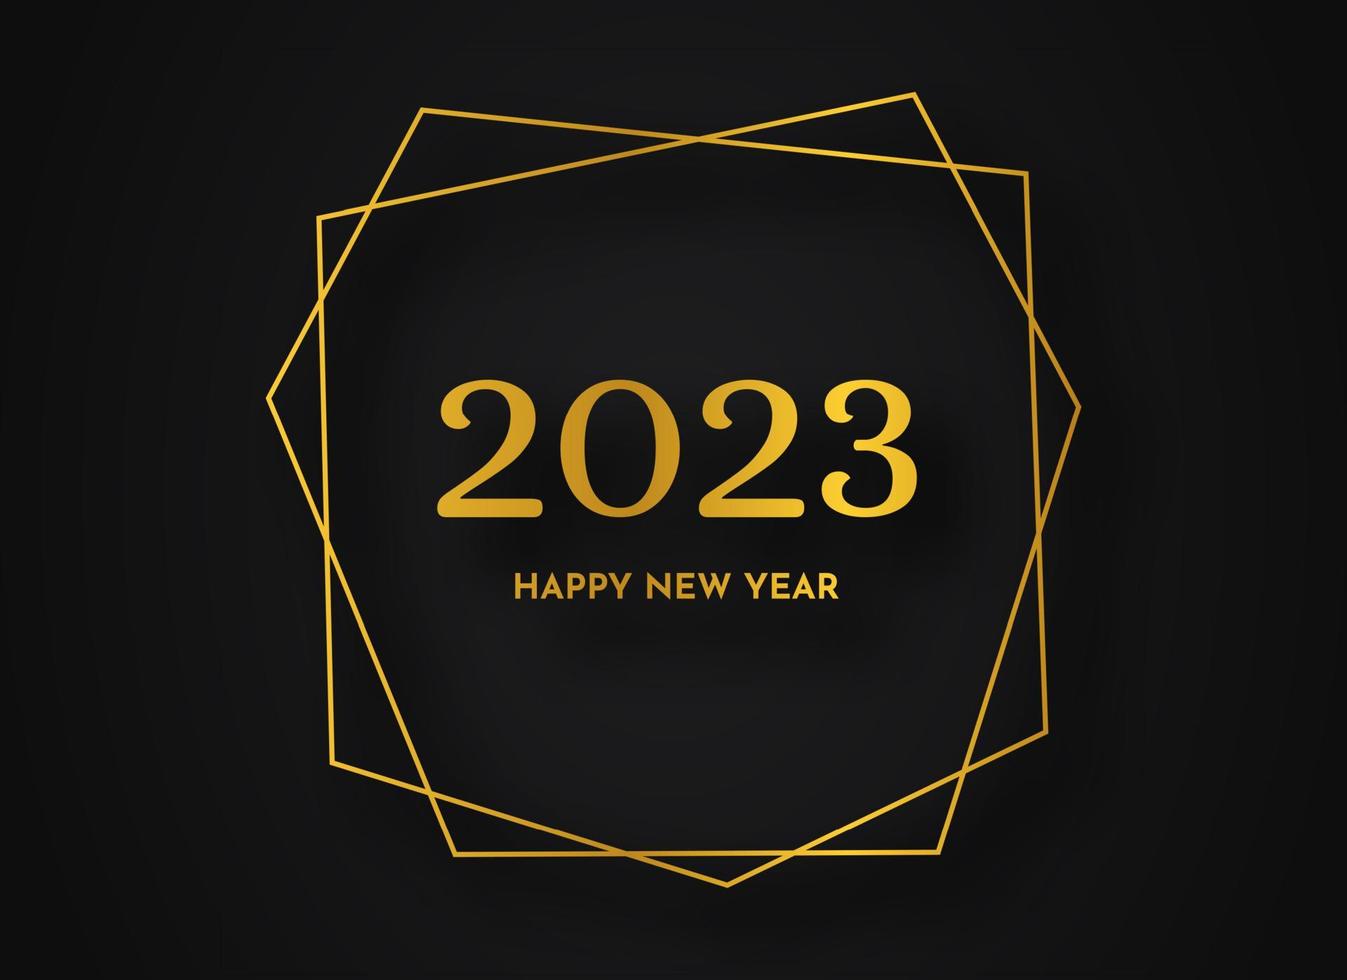 2023 Happy New Year gold geometric polygonal background. Gold geometric polygonal frame with shining effects for Christmas holiday greeting card, flyers or posters. Vector illustration